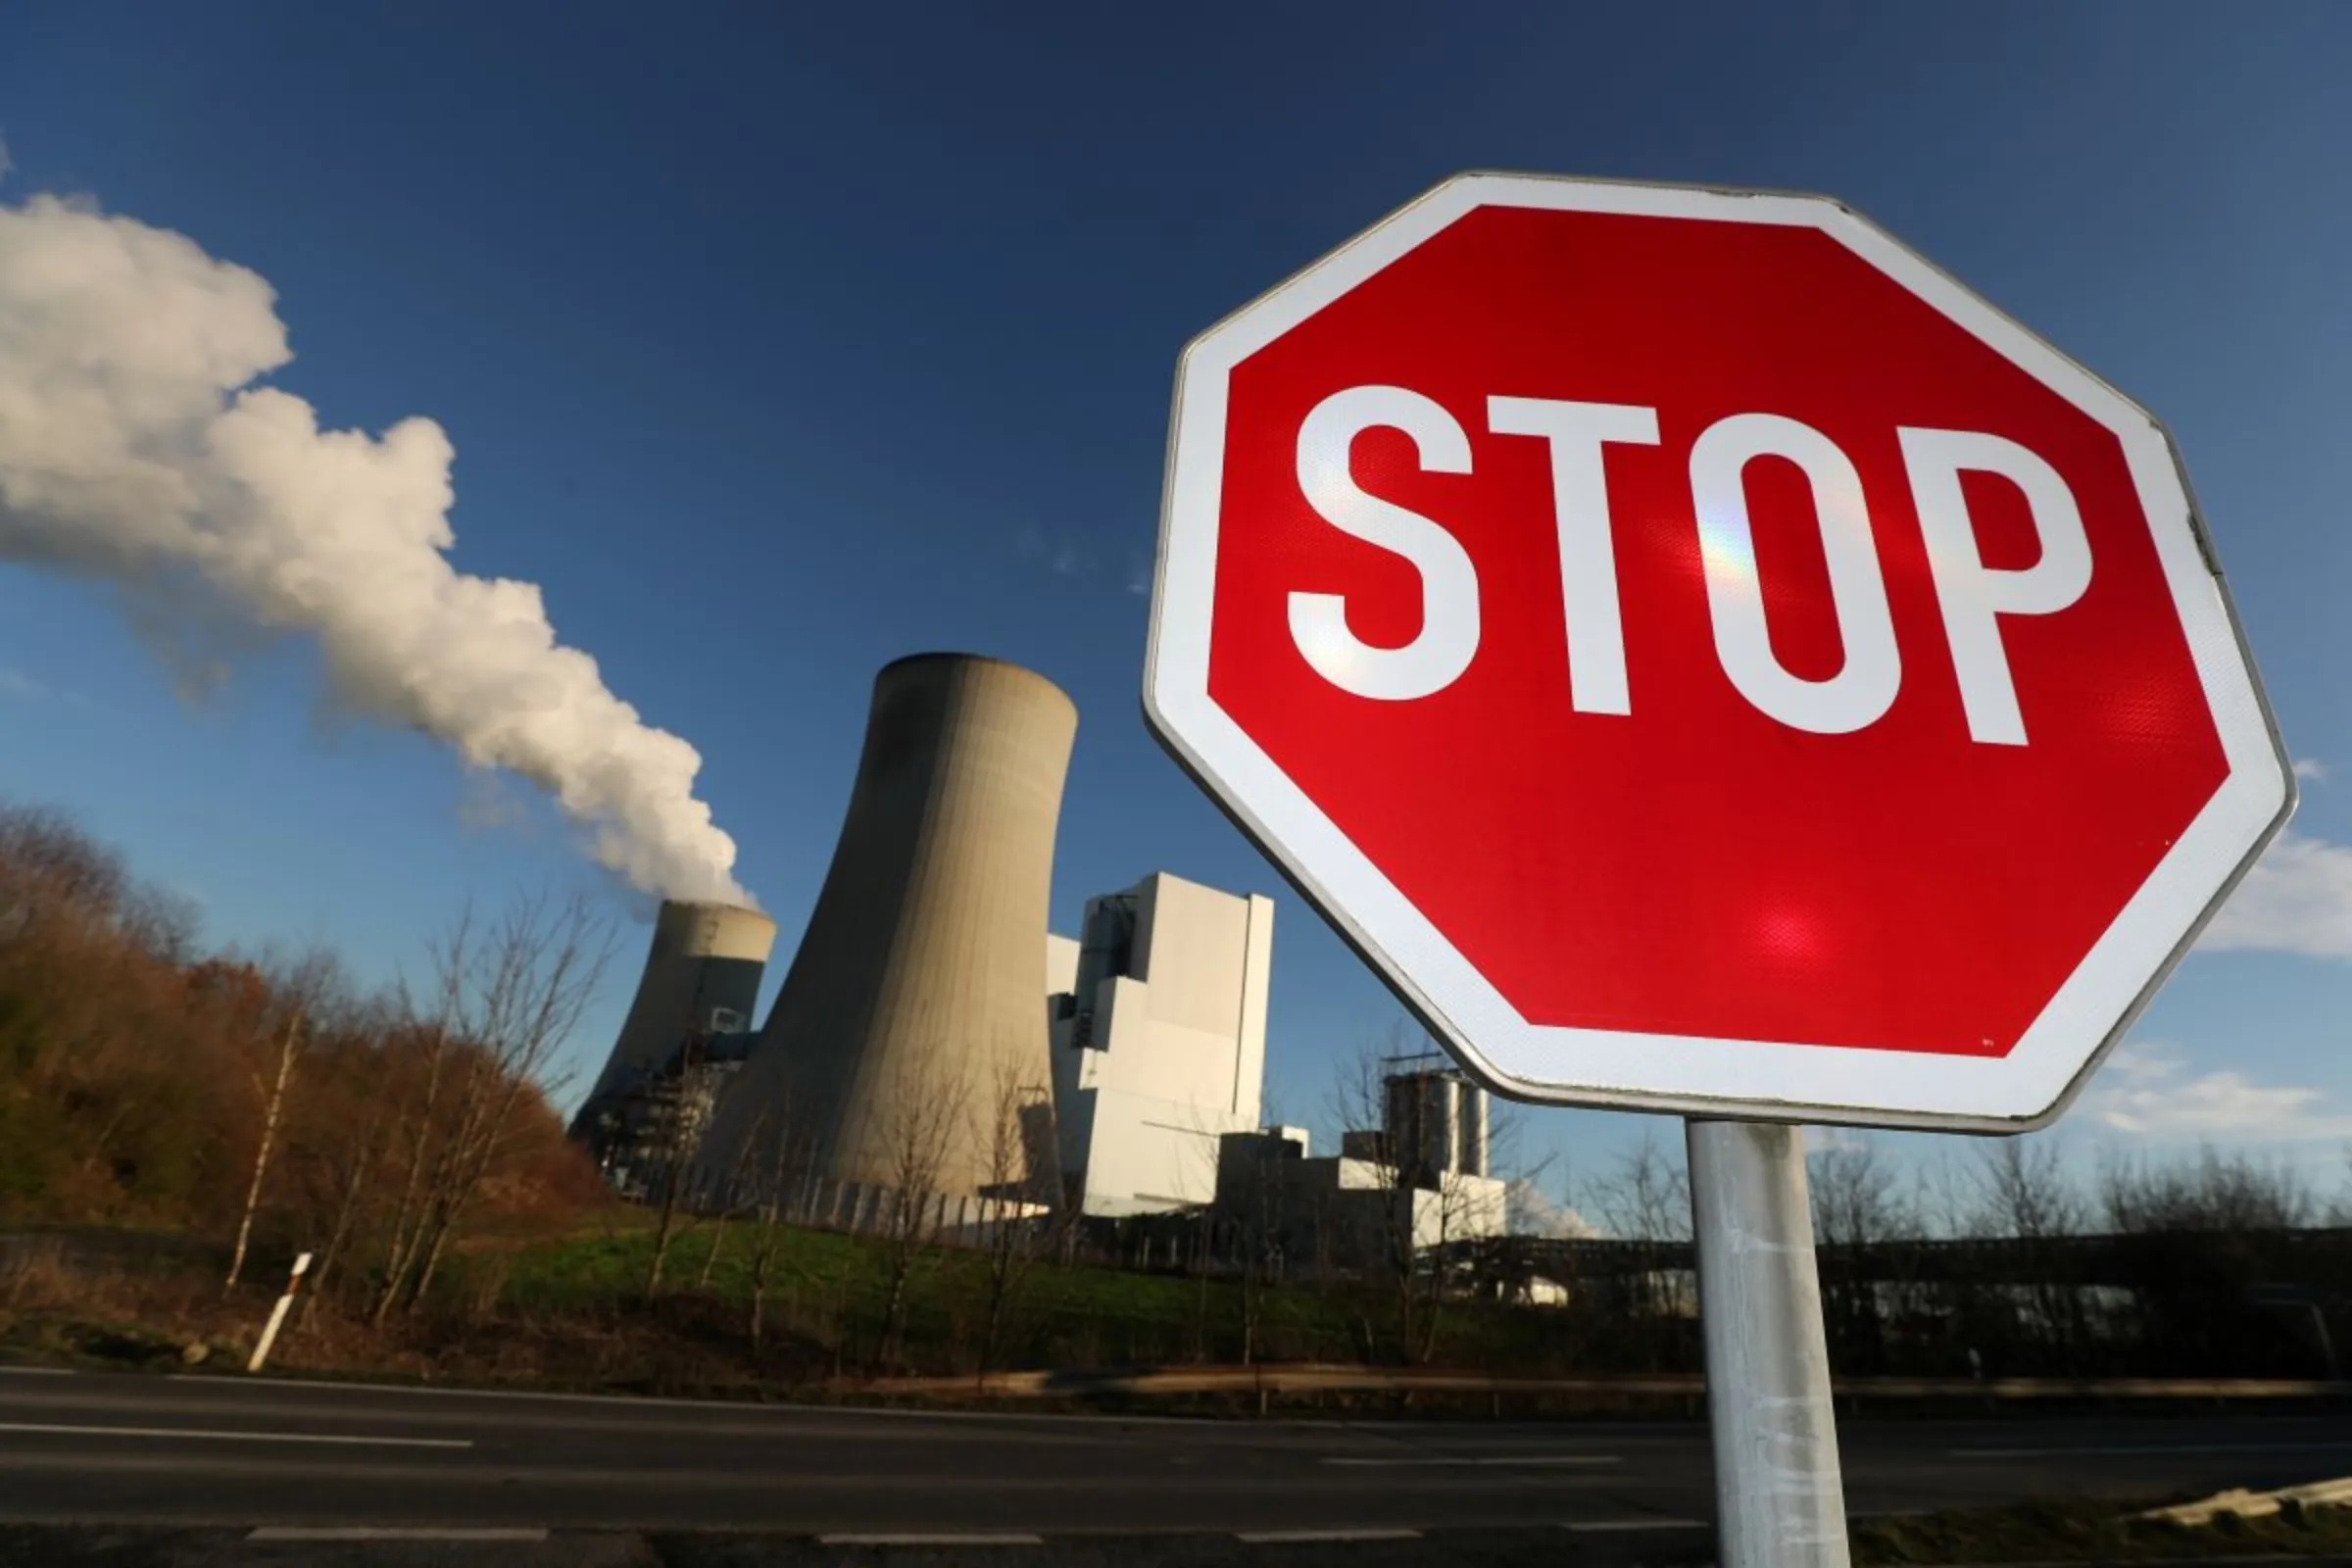 A Stop sign stands in front of the Neurath lignite power plant of German utility RWE, west of Cologne, Germany, January 16, 2020. REUTERS/Wolfgang Rattay